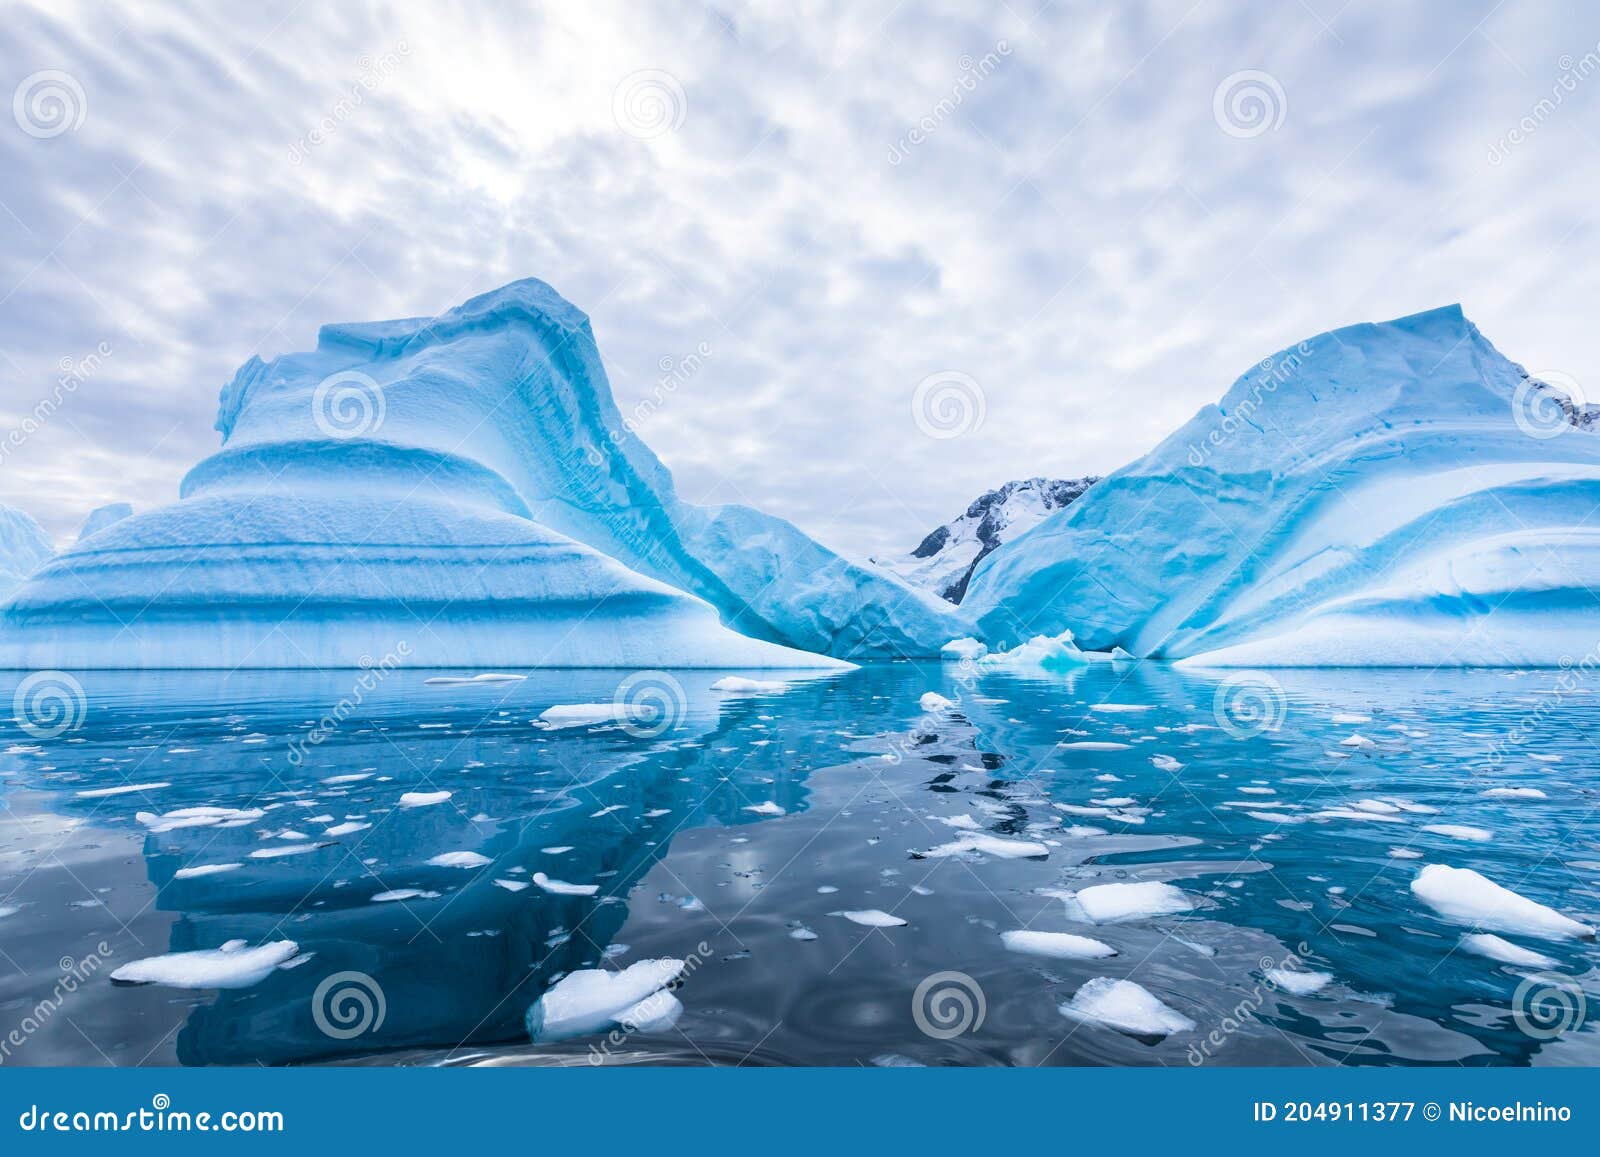 iceberg in antarctica floating in the sea, frozen landscape with massive pieces of ice reflecting on water surface, antarctic